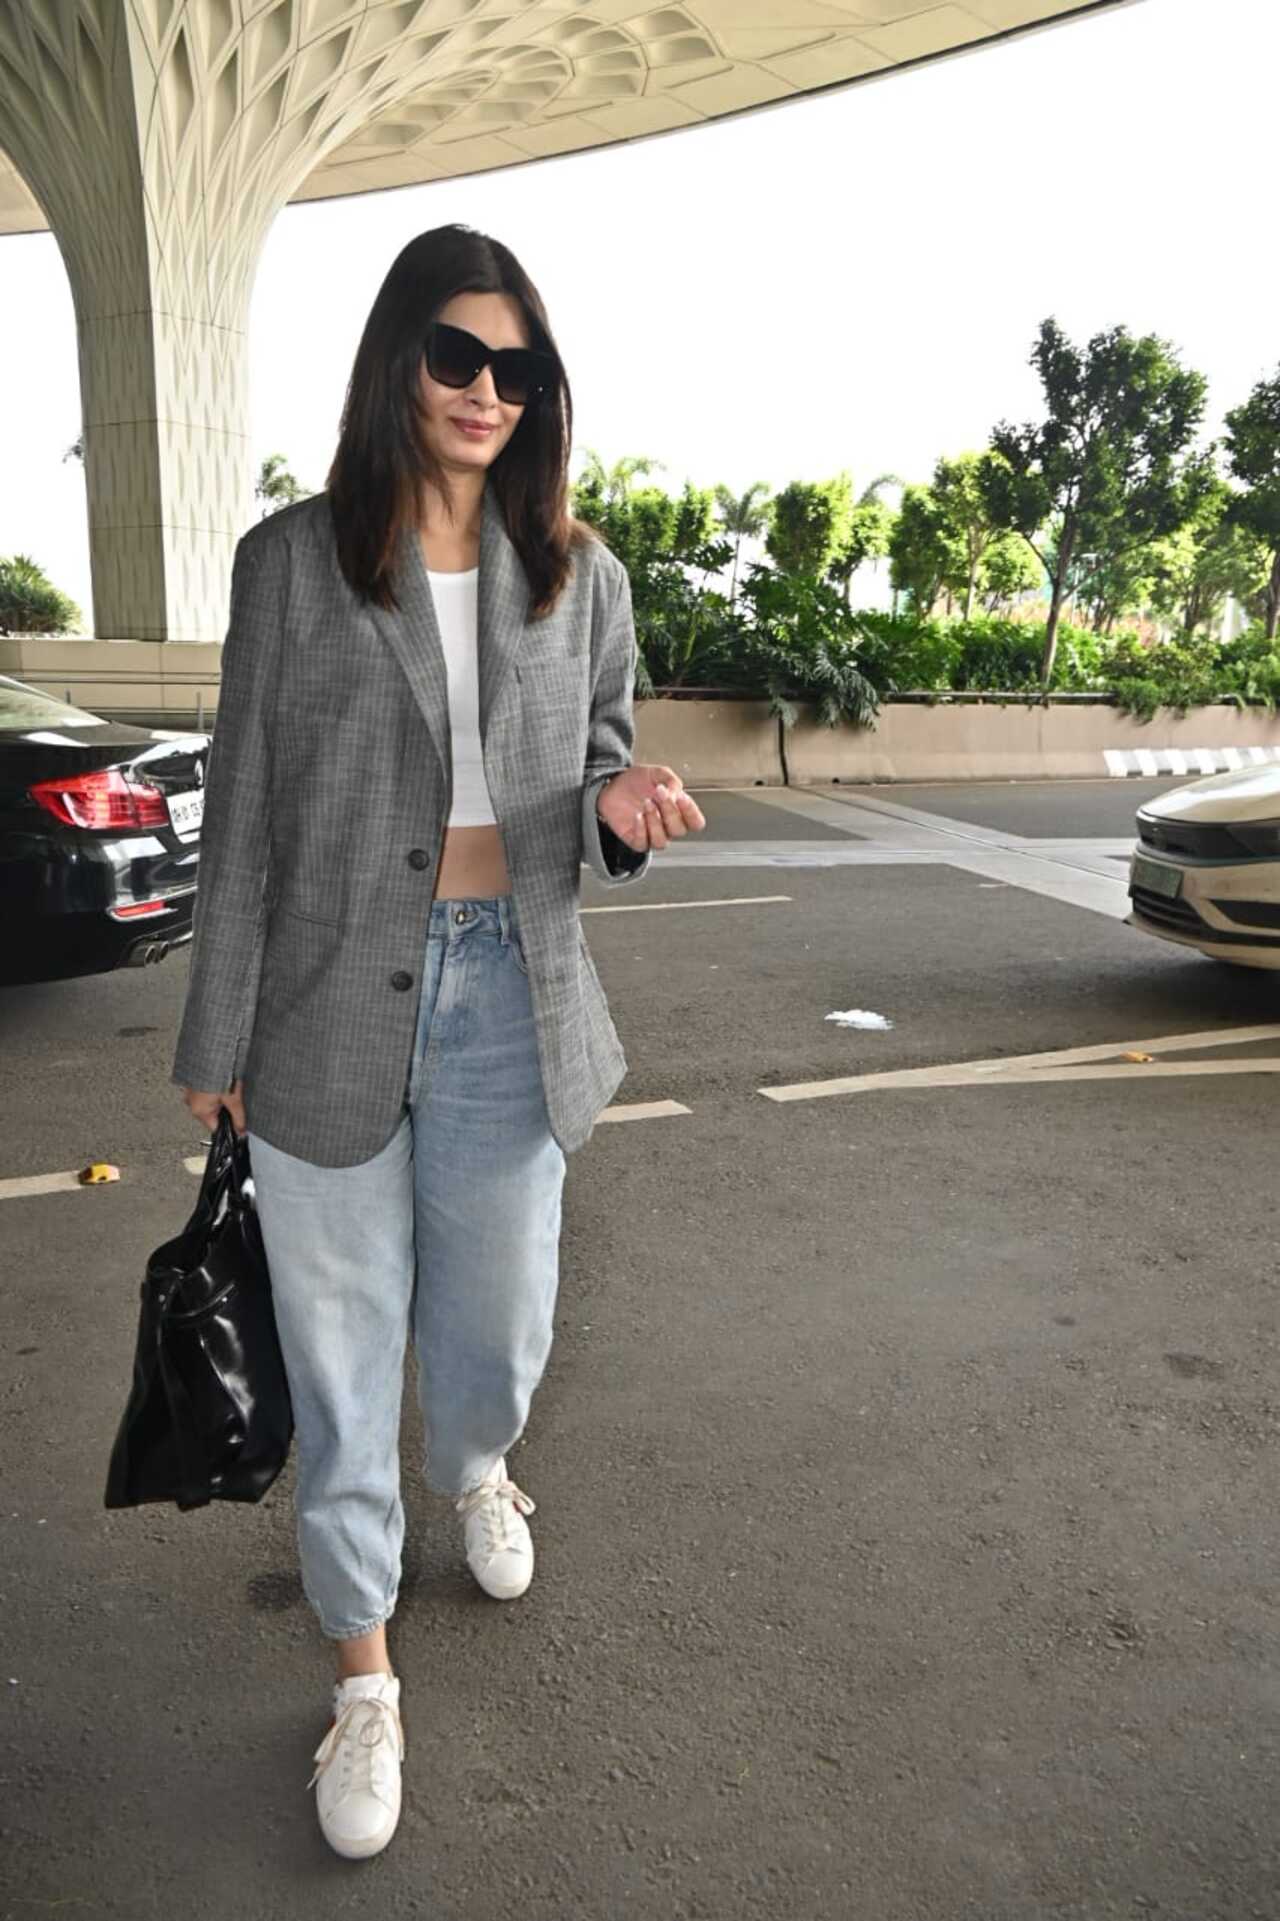 Diana Penty was at the airport. The actress wore a white crop top and paired it with a checkered jacket and baggy pants